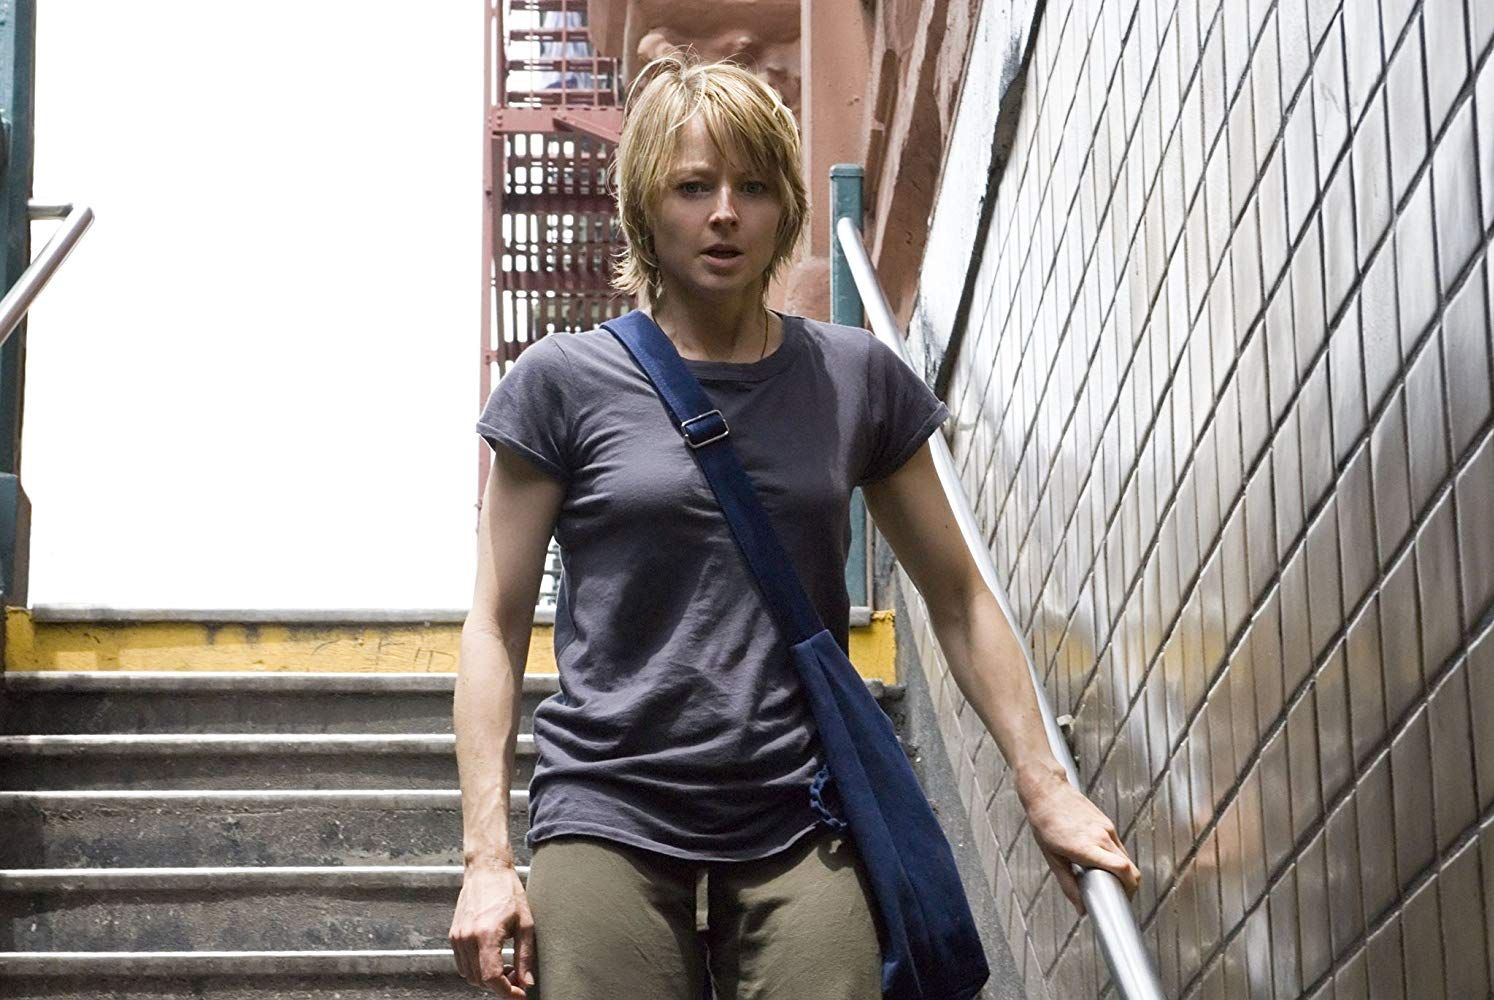 Erica Bain (Jodie Foster) becomes a vigilante on the streets of New York in The Brave One (2007)